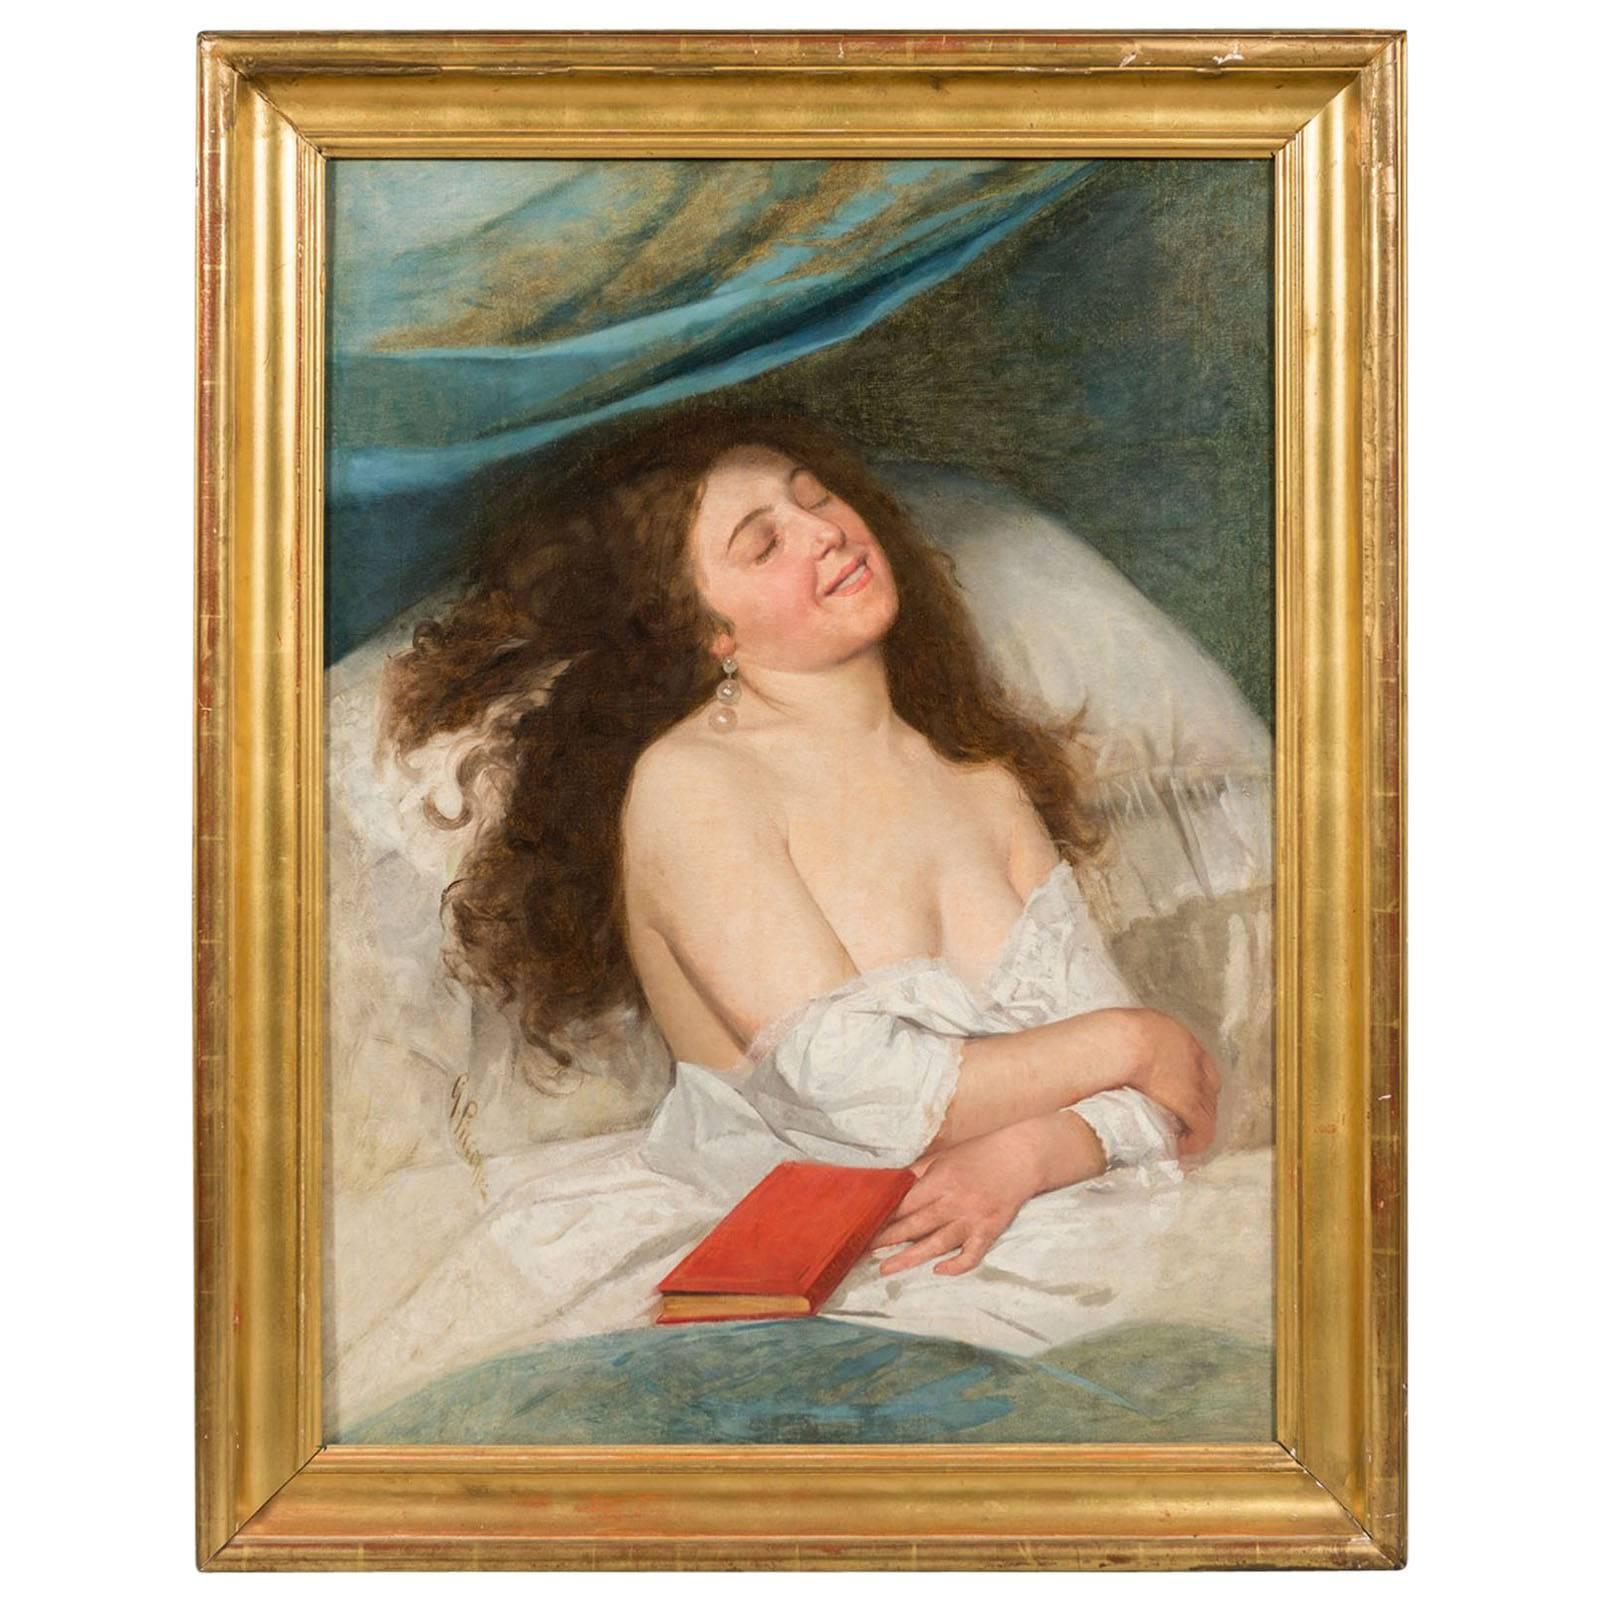 19th Century Italian Oil Titled "Pleasurable Thoughts" by Giovanni Piccone